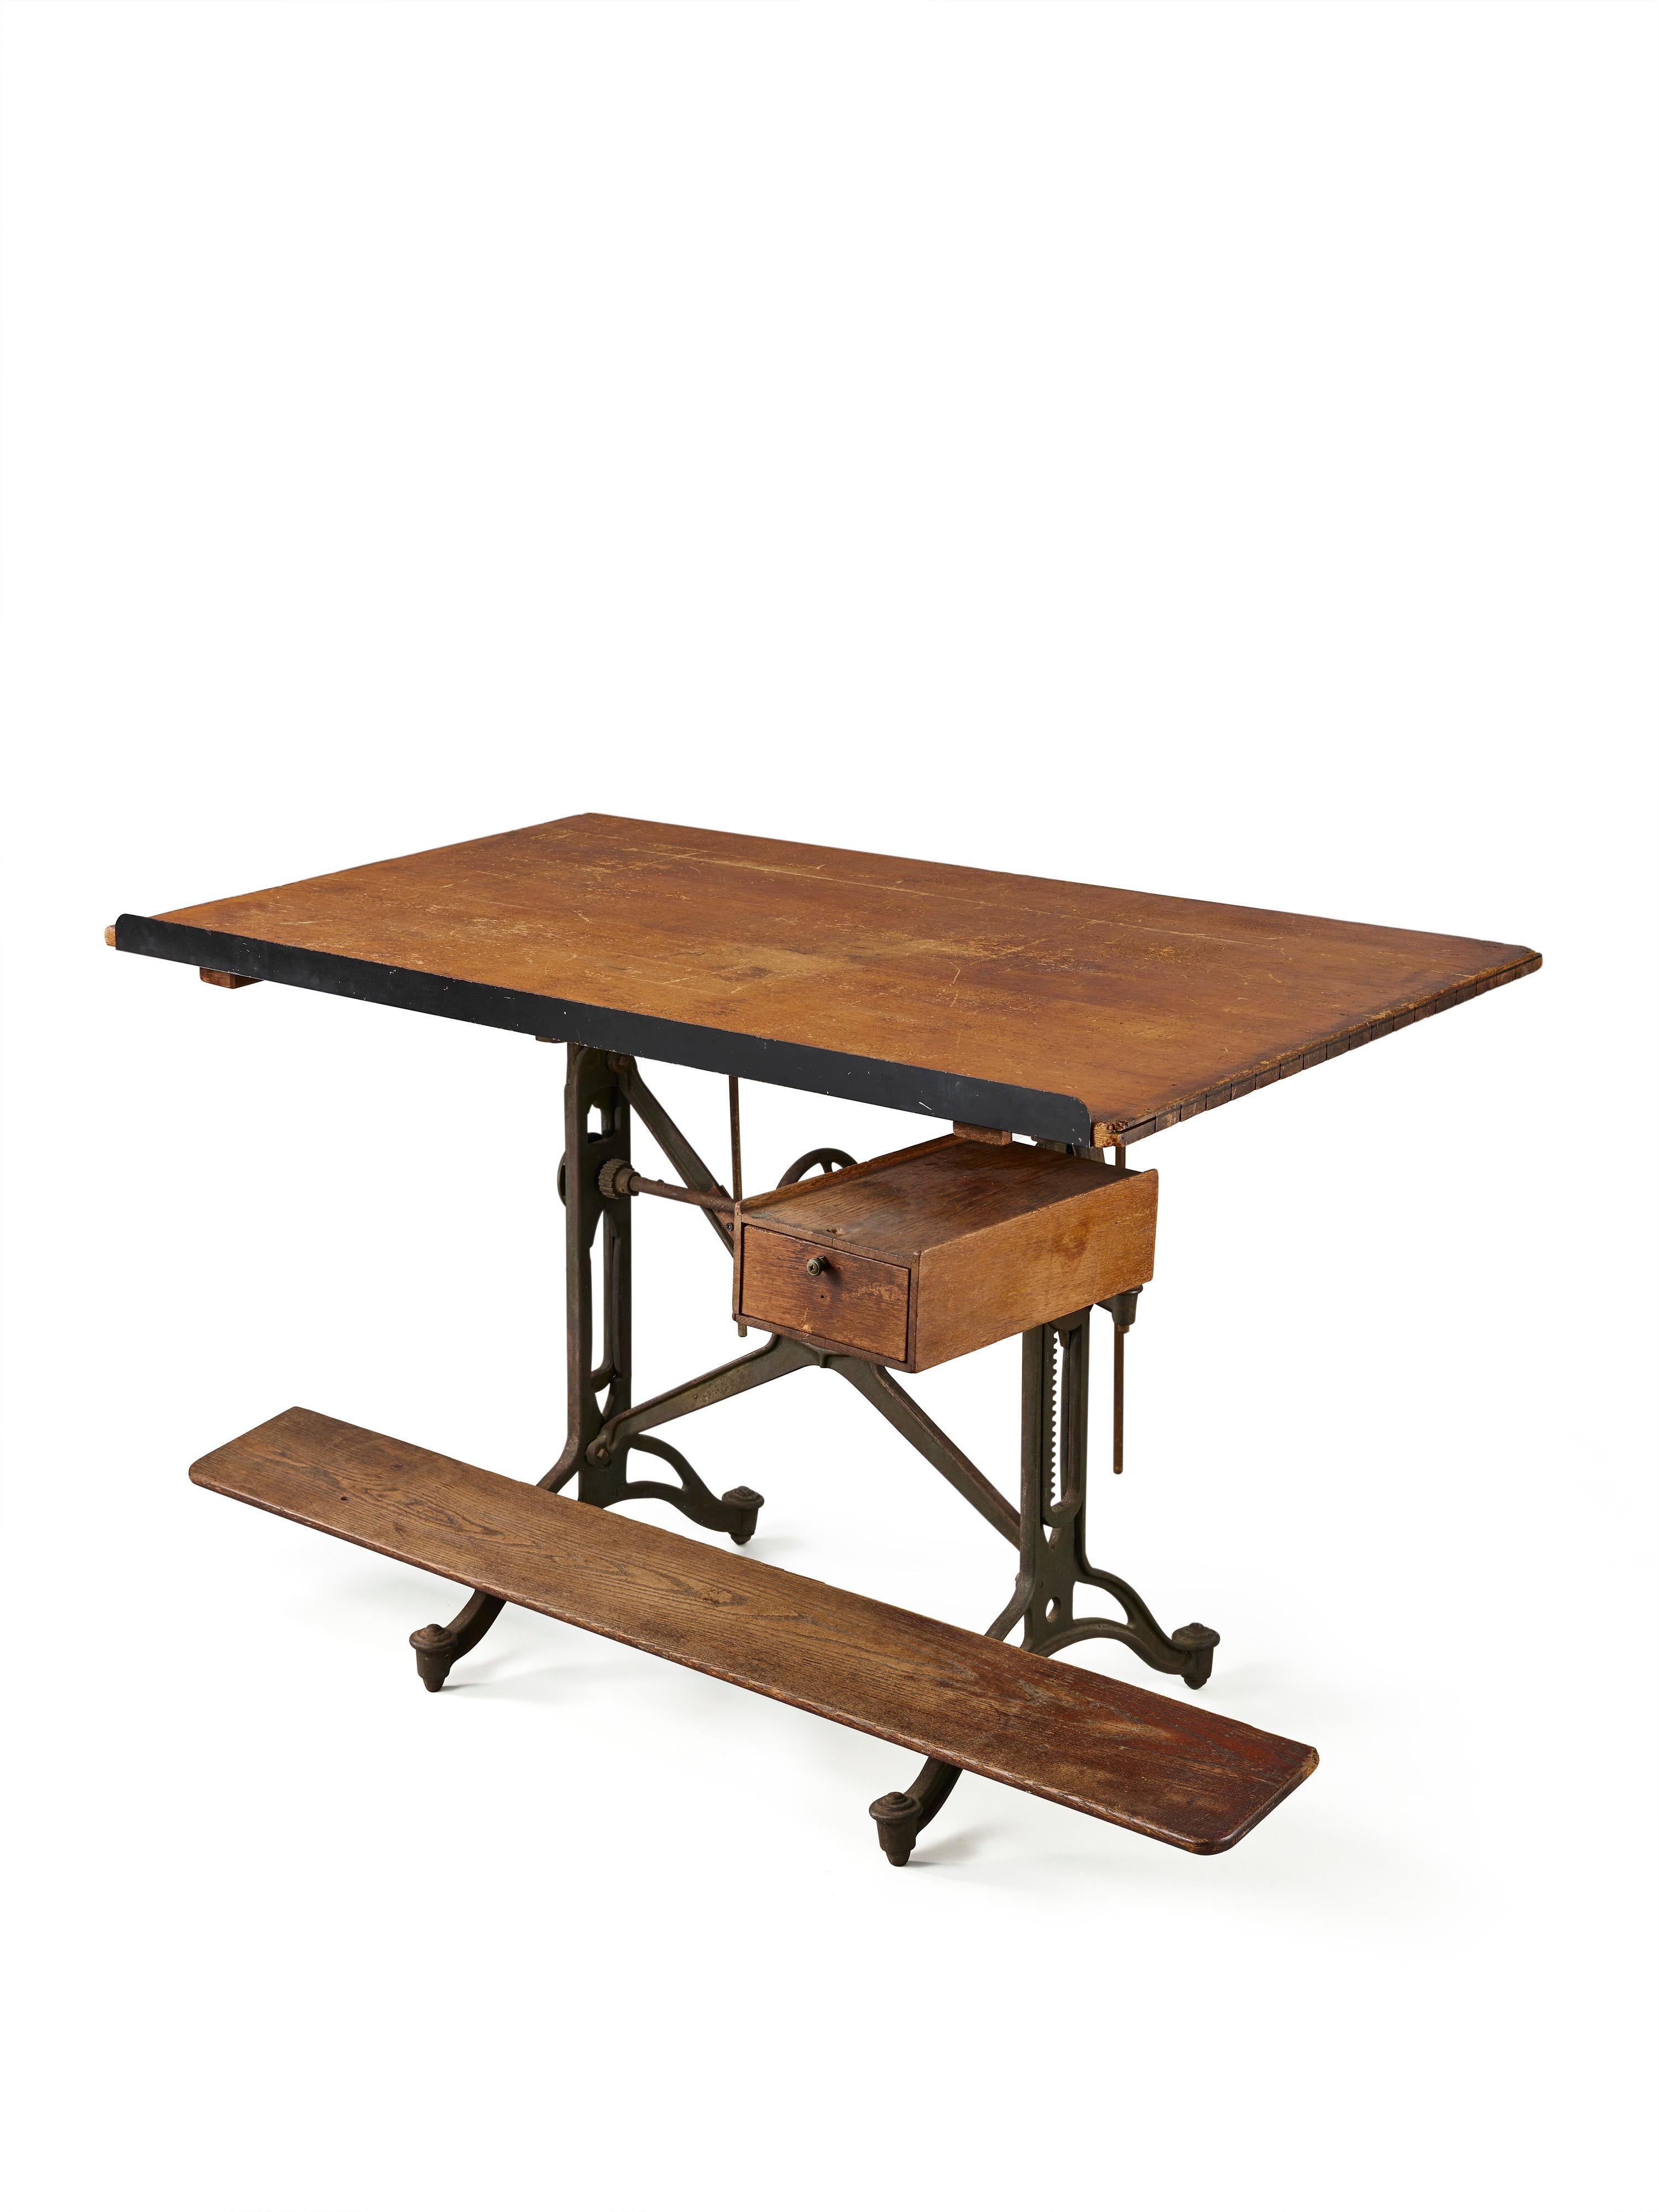 Industrial Original Keuffel and Esser Drafting Table For Sale